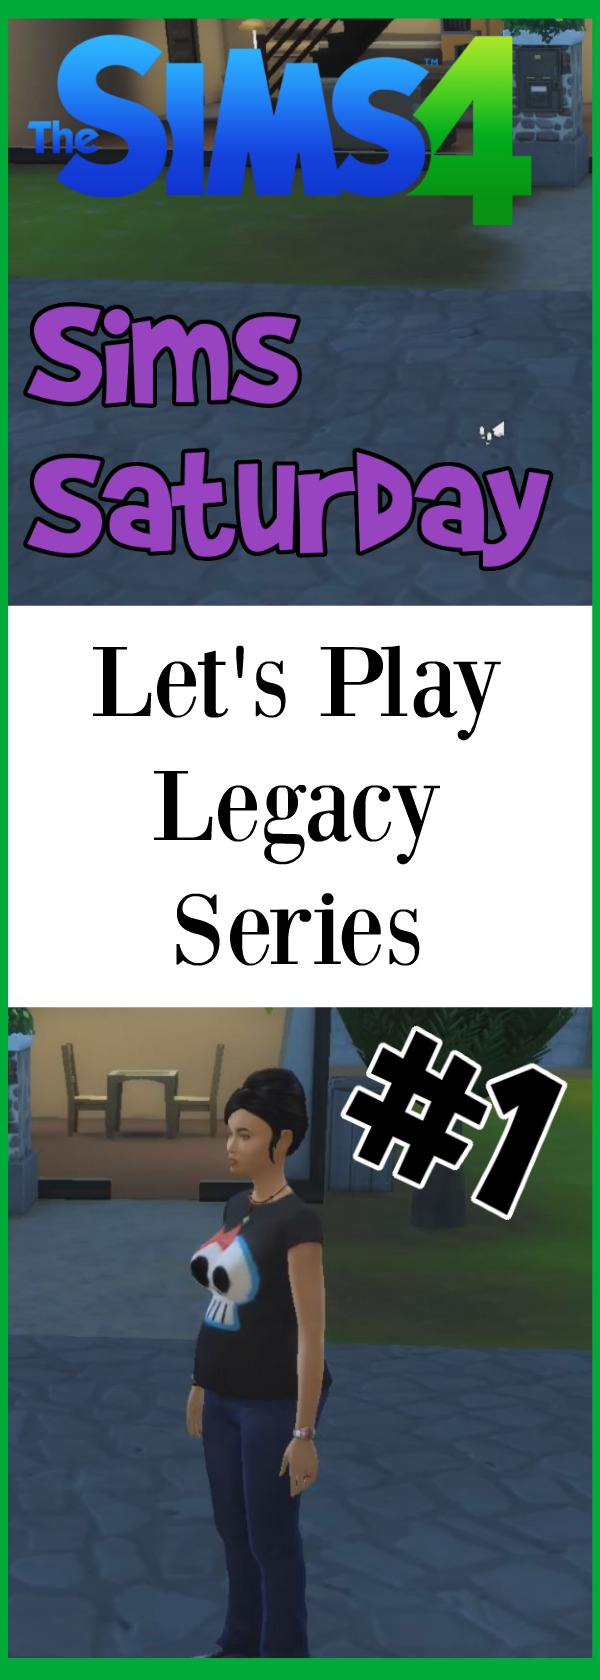 Do you love playing the Sims and watching Sim 4 game play by other gamers? Check out the first episode of this Family Friendly Sims 4 Let's Play Legacy Series.